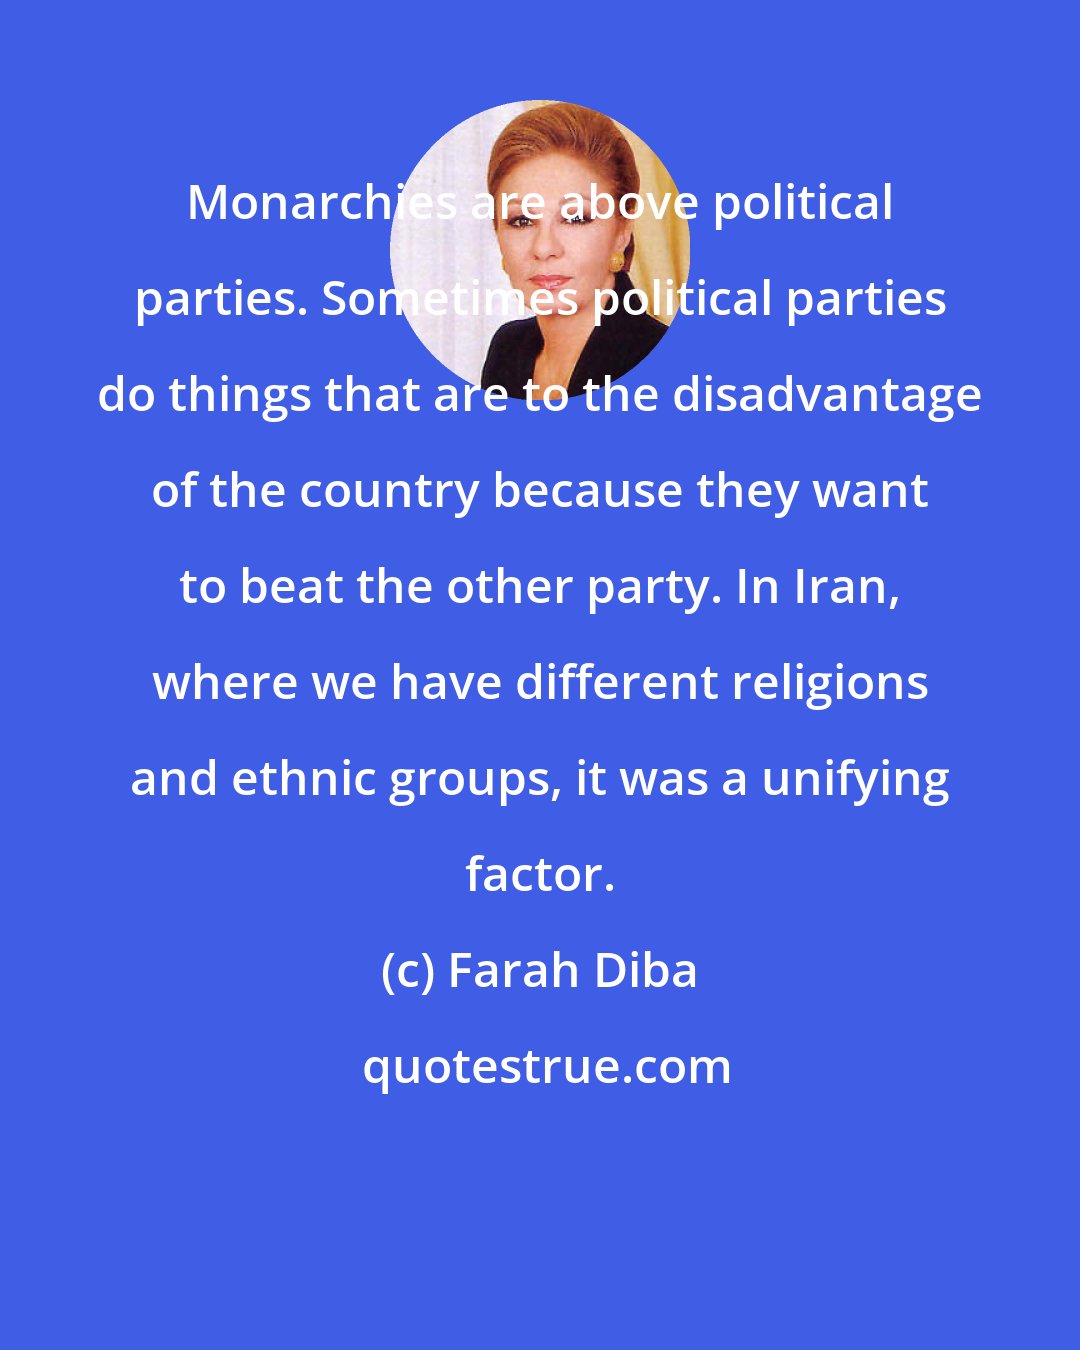 Farah Diba: Monarchies are above political parties. Sometimes political parties do things that are to the disadvantage of the country because they want to beat the other party. In Iran, where we have different religions and ethnic groups, it was a unifying factor.